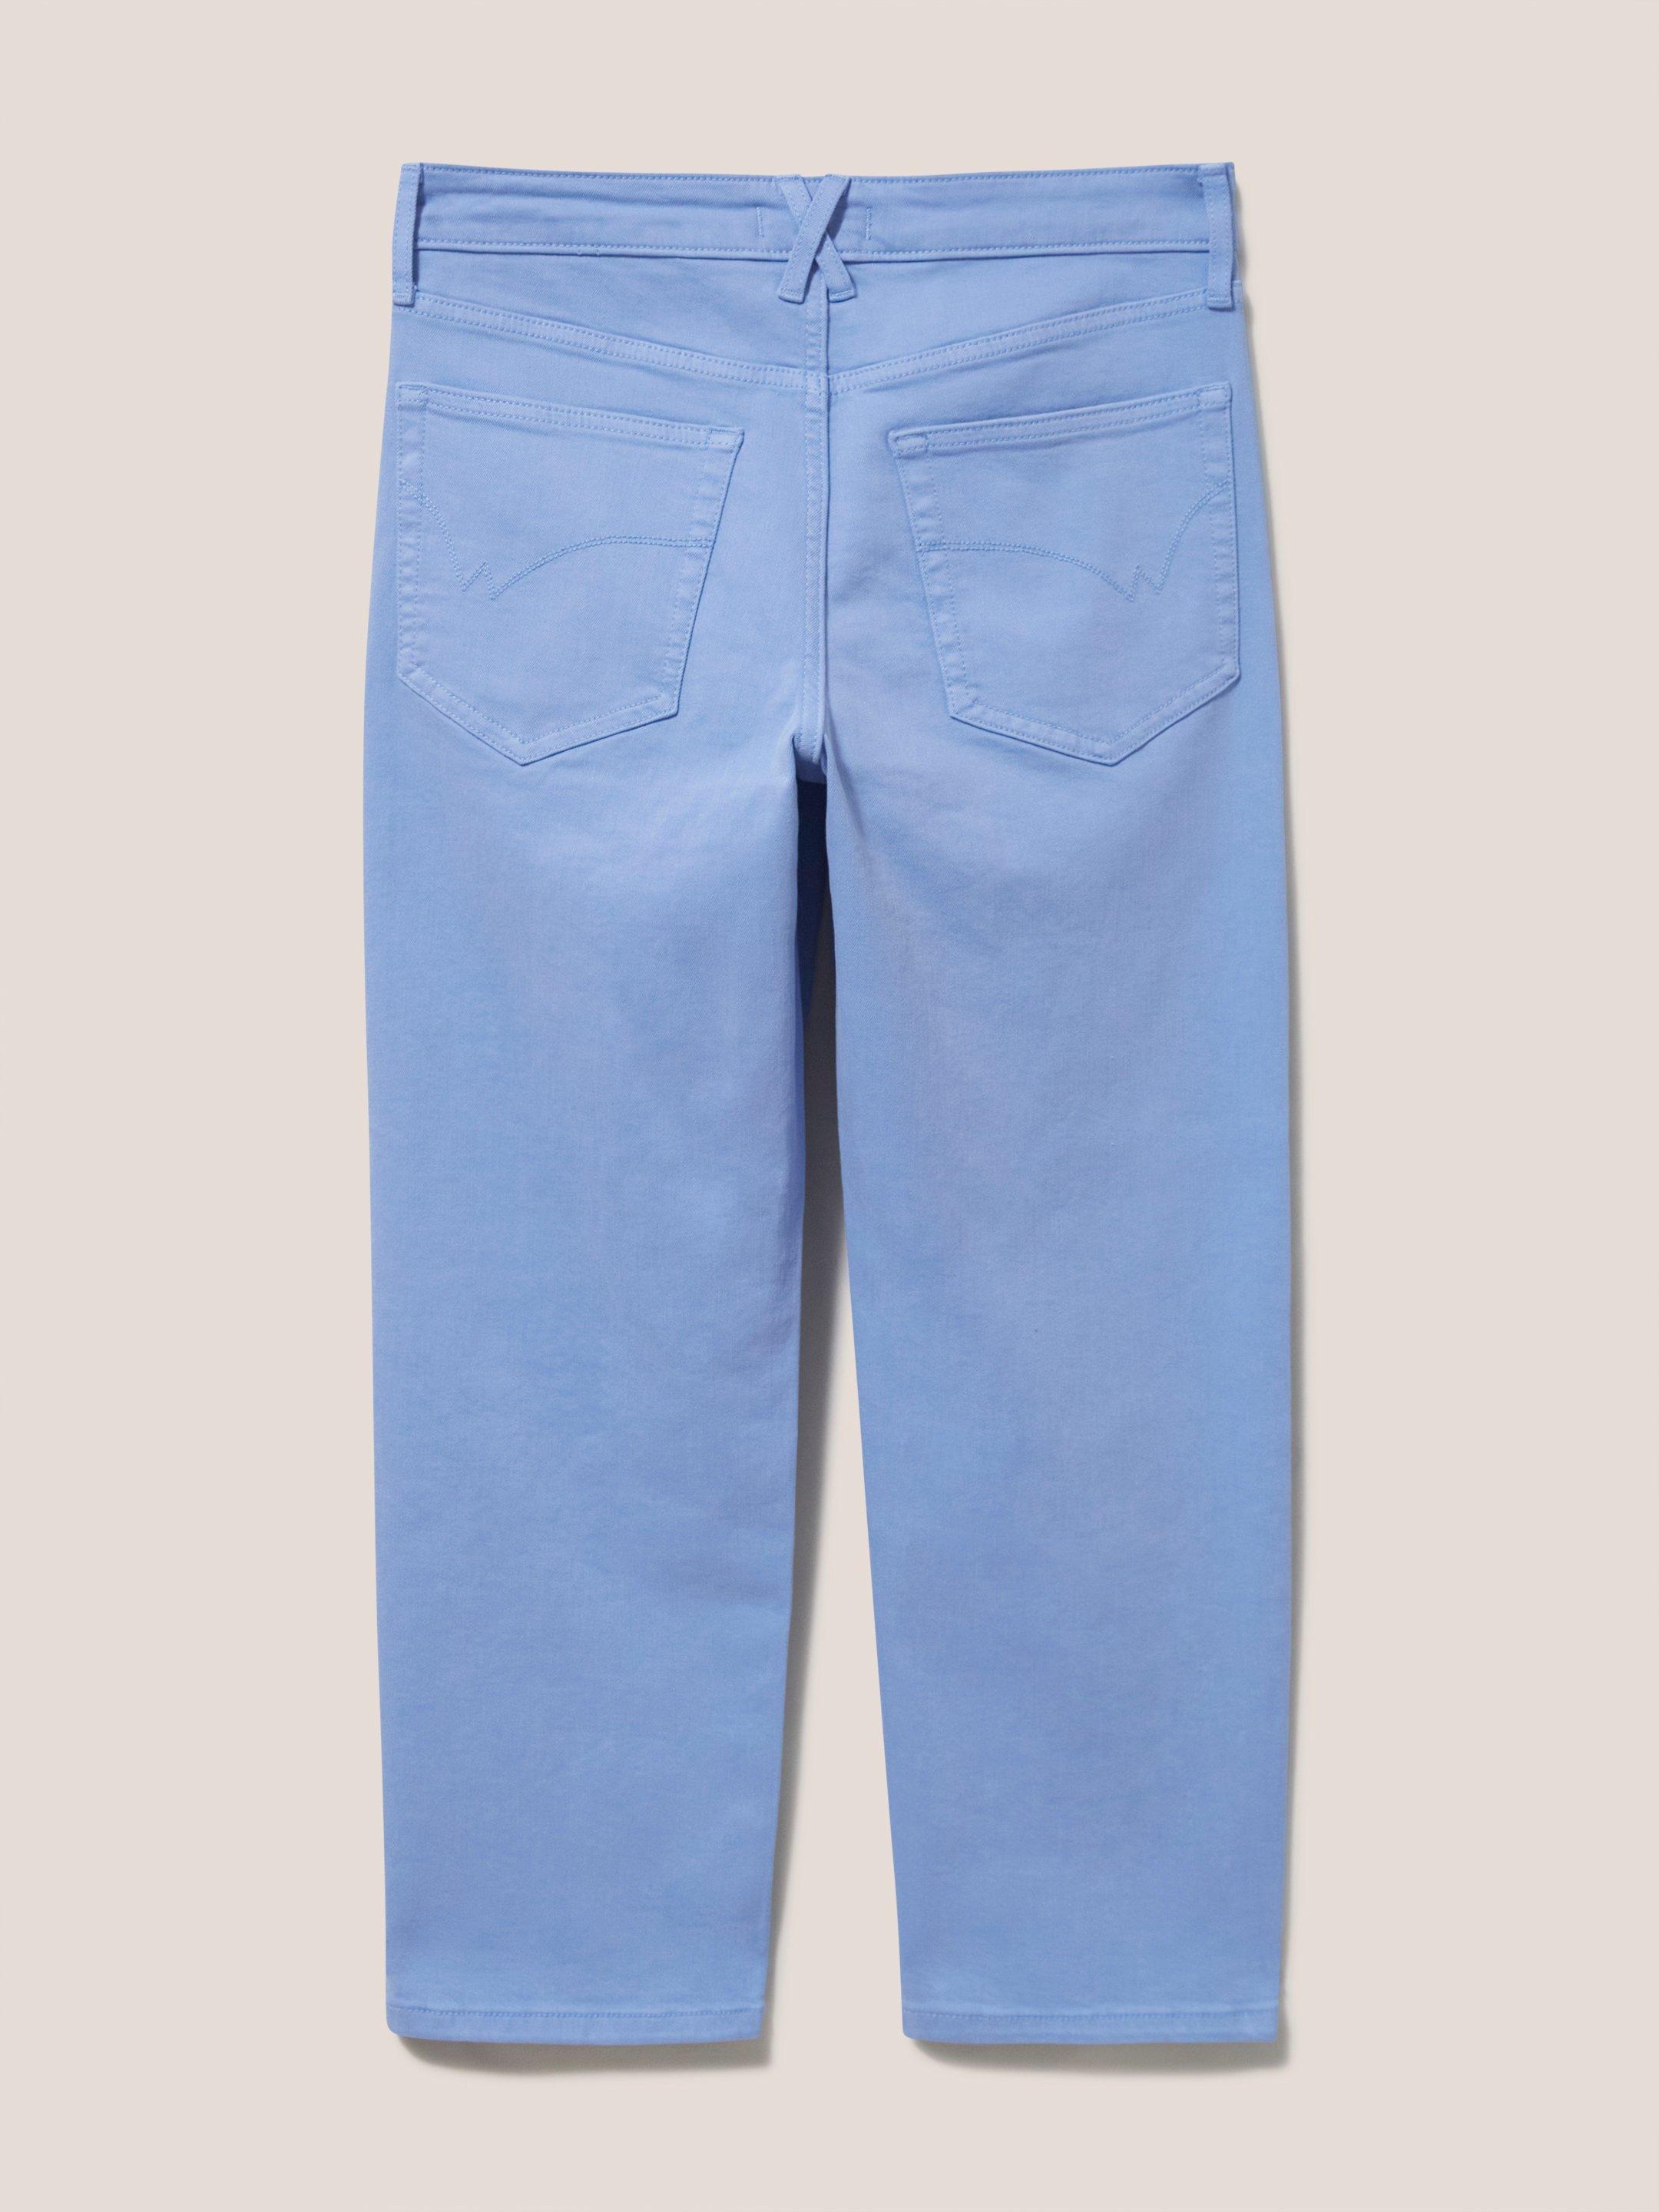 Blake Straight Crop Jeans in MID BLUE - FLAT BACK